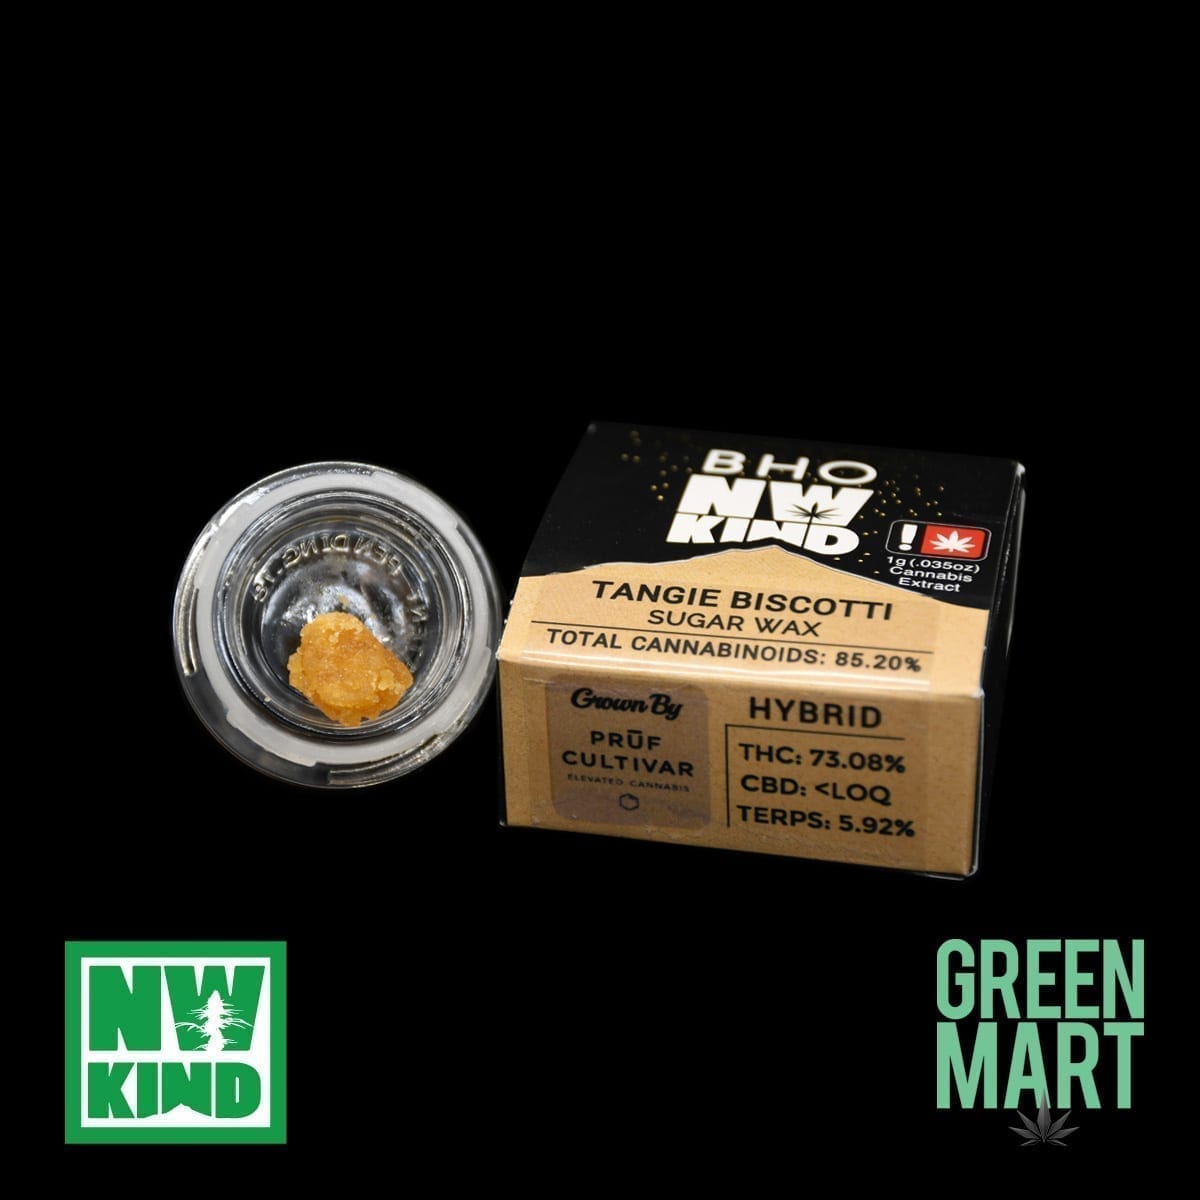 NW Kind Extracts - Tangie Biscotti Sugar Wax